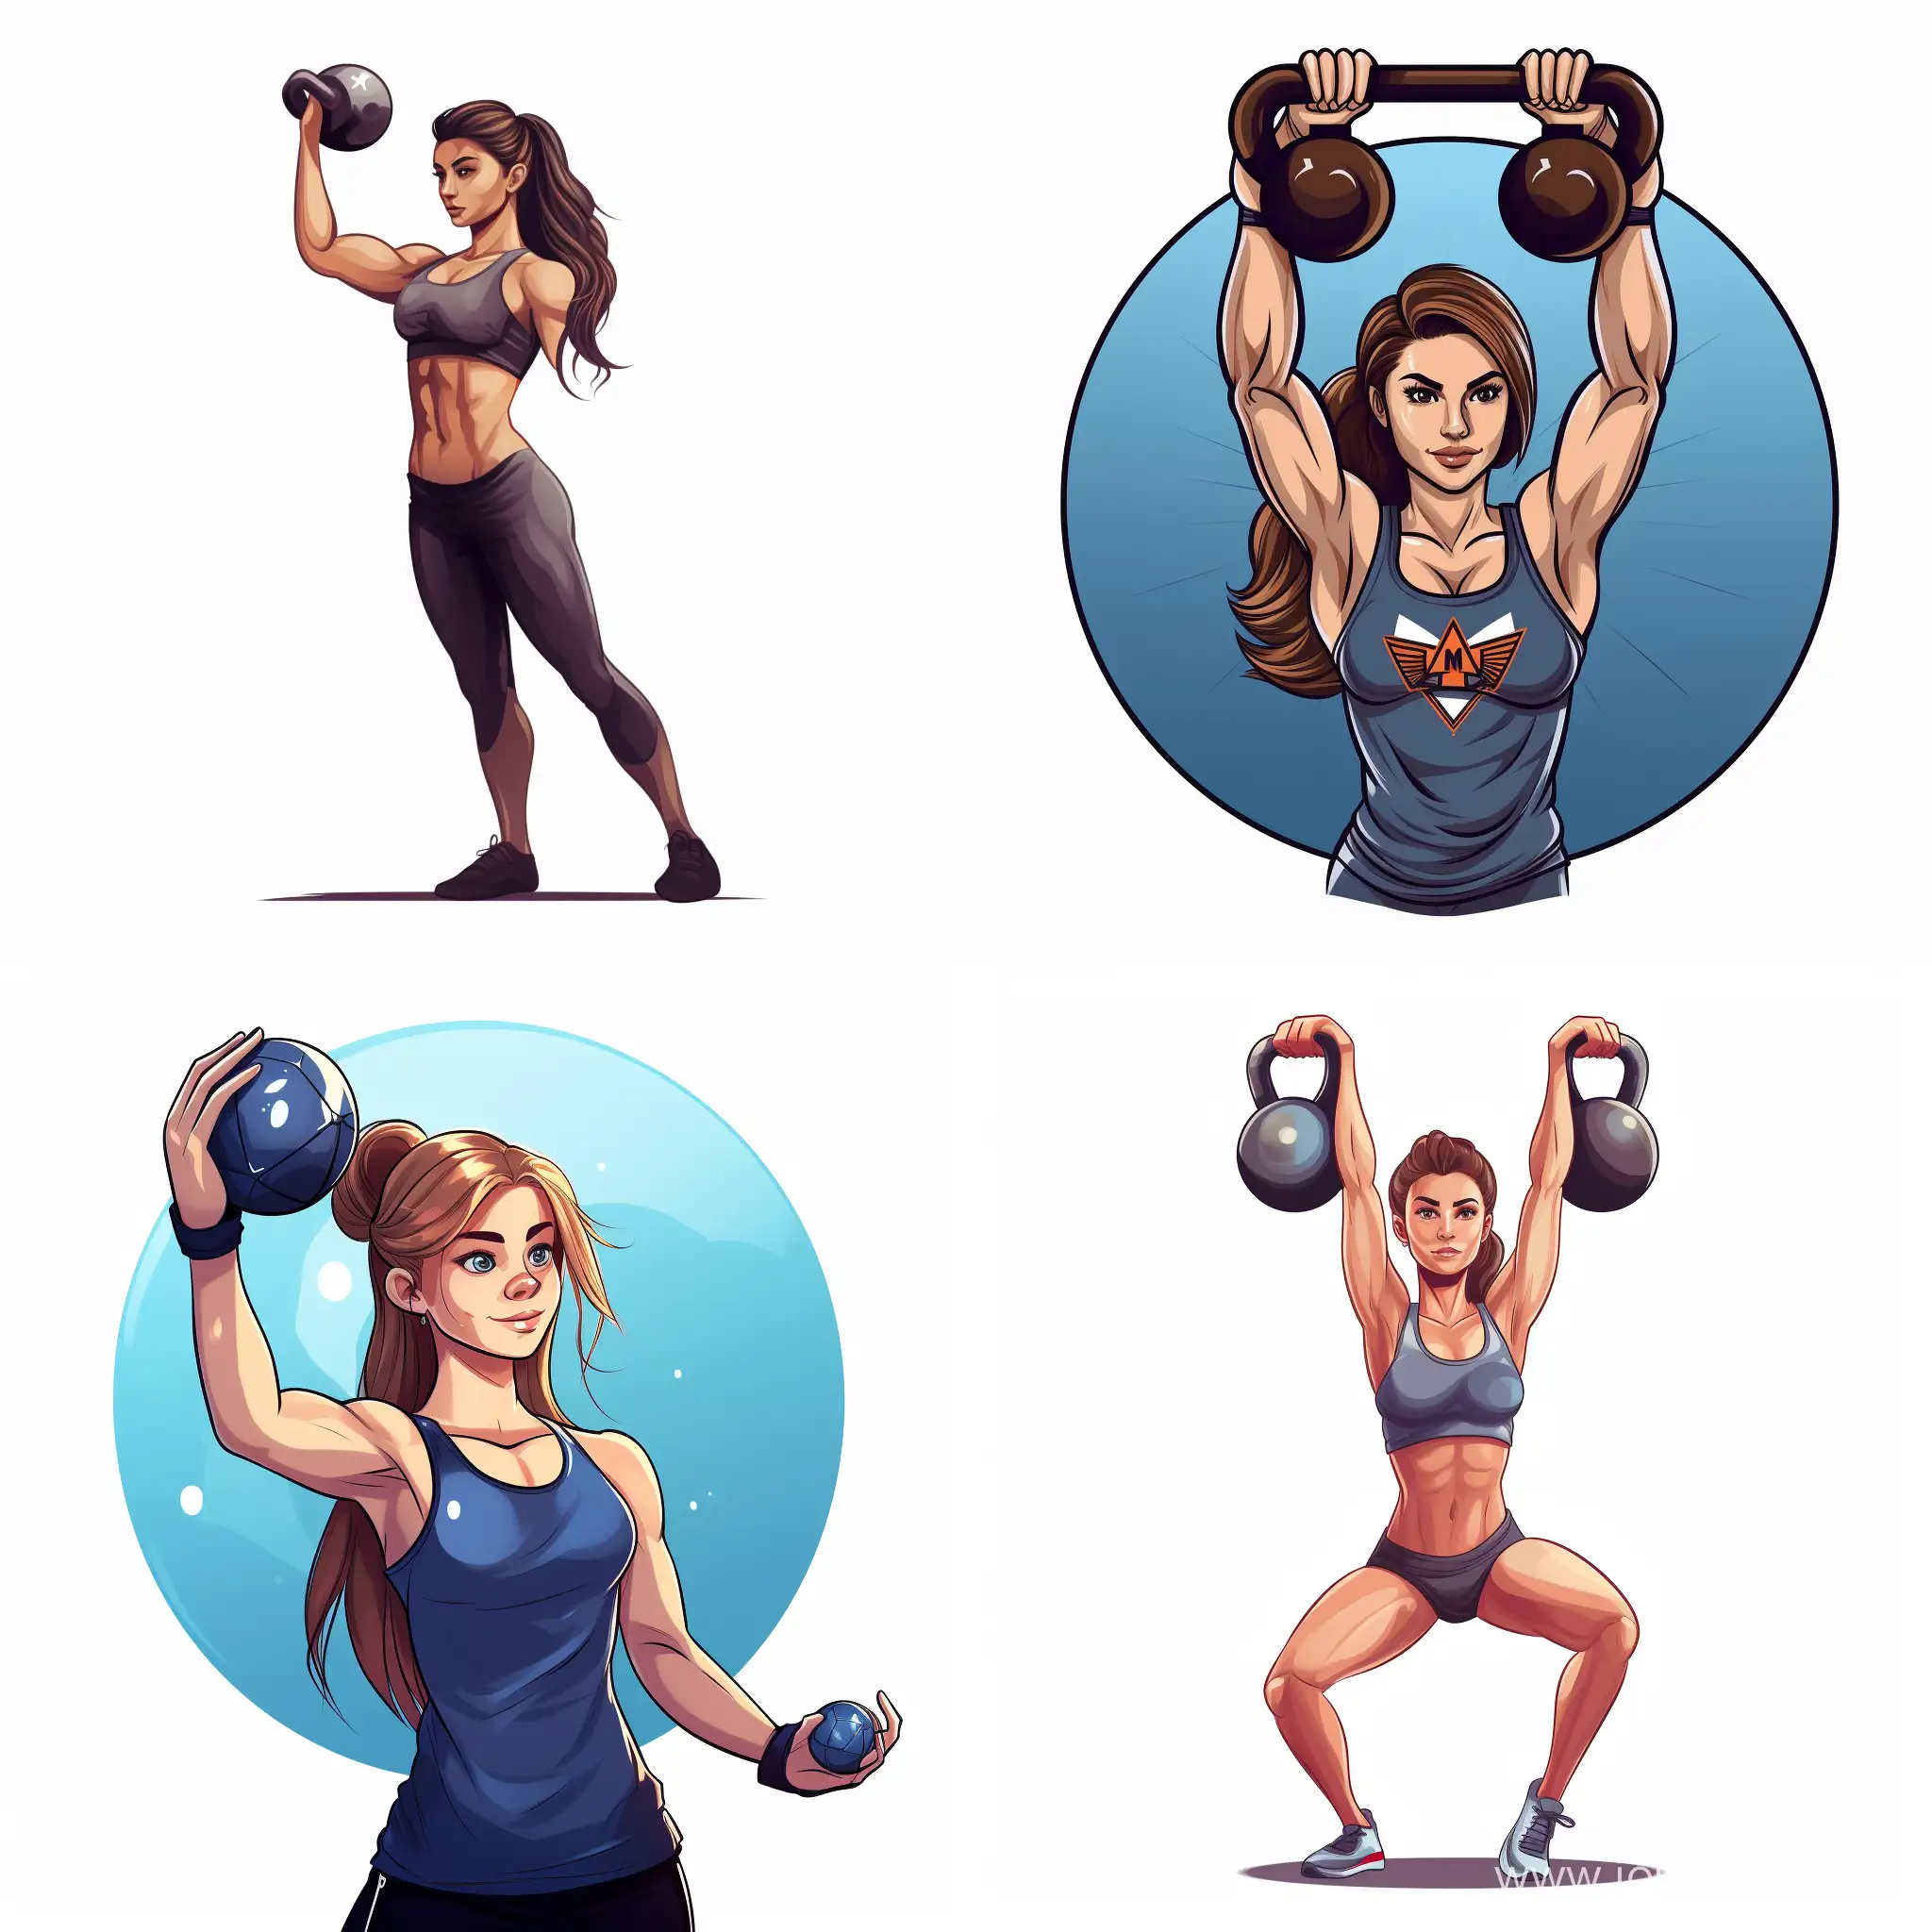 Cartoon-Style-Girl-Excelling-in-Kettlebell-Crossfit-Training